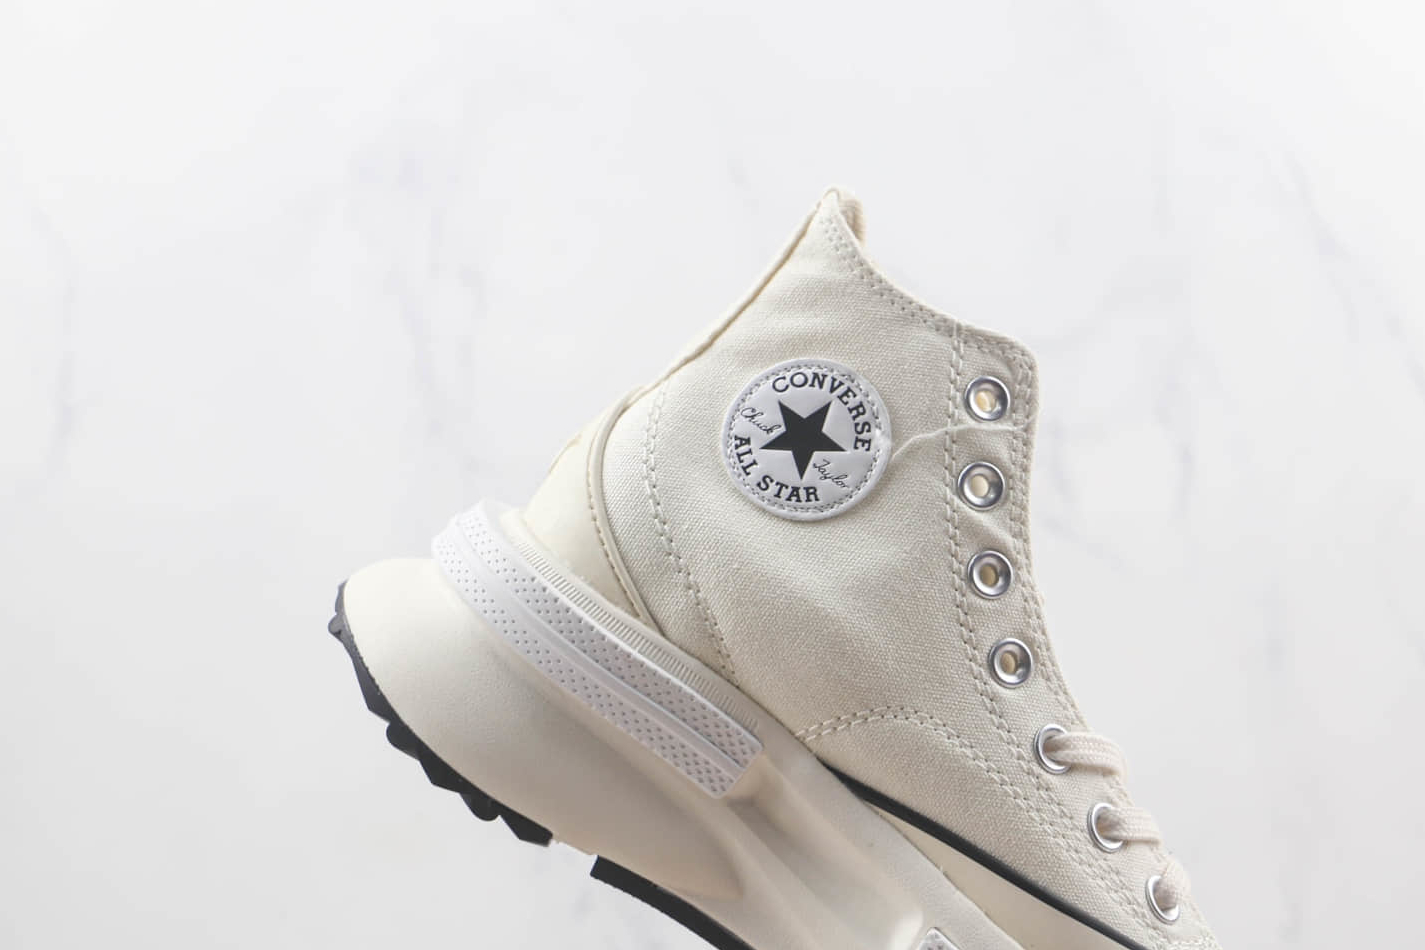 Converse Run Star Legacy CX High 'Egret' A00868C - Stylish and Iconic Footwear | Shop Now